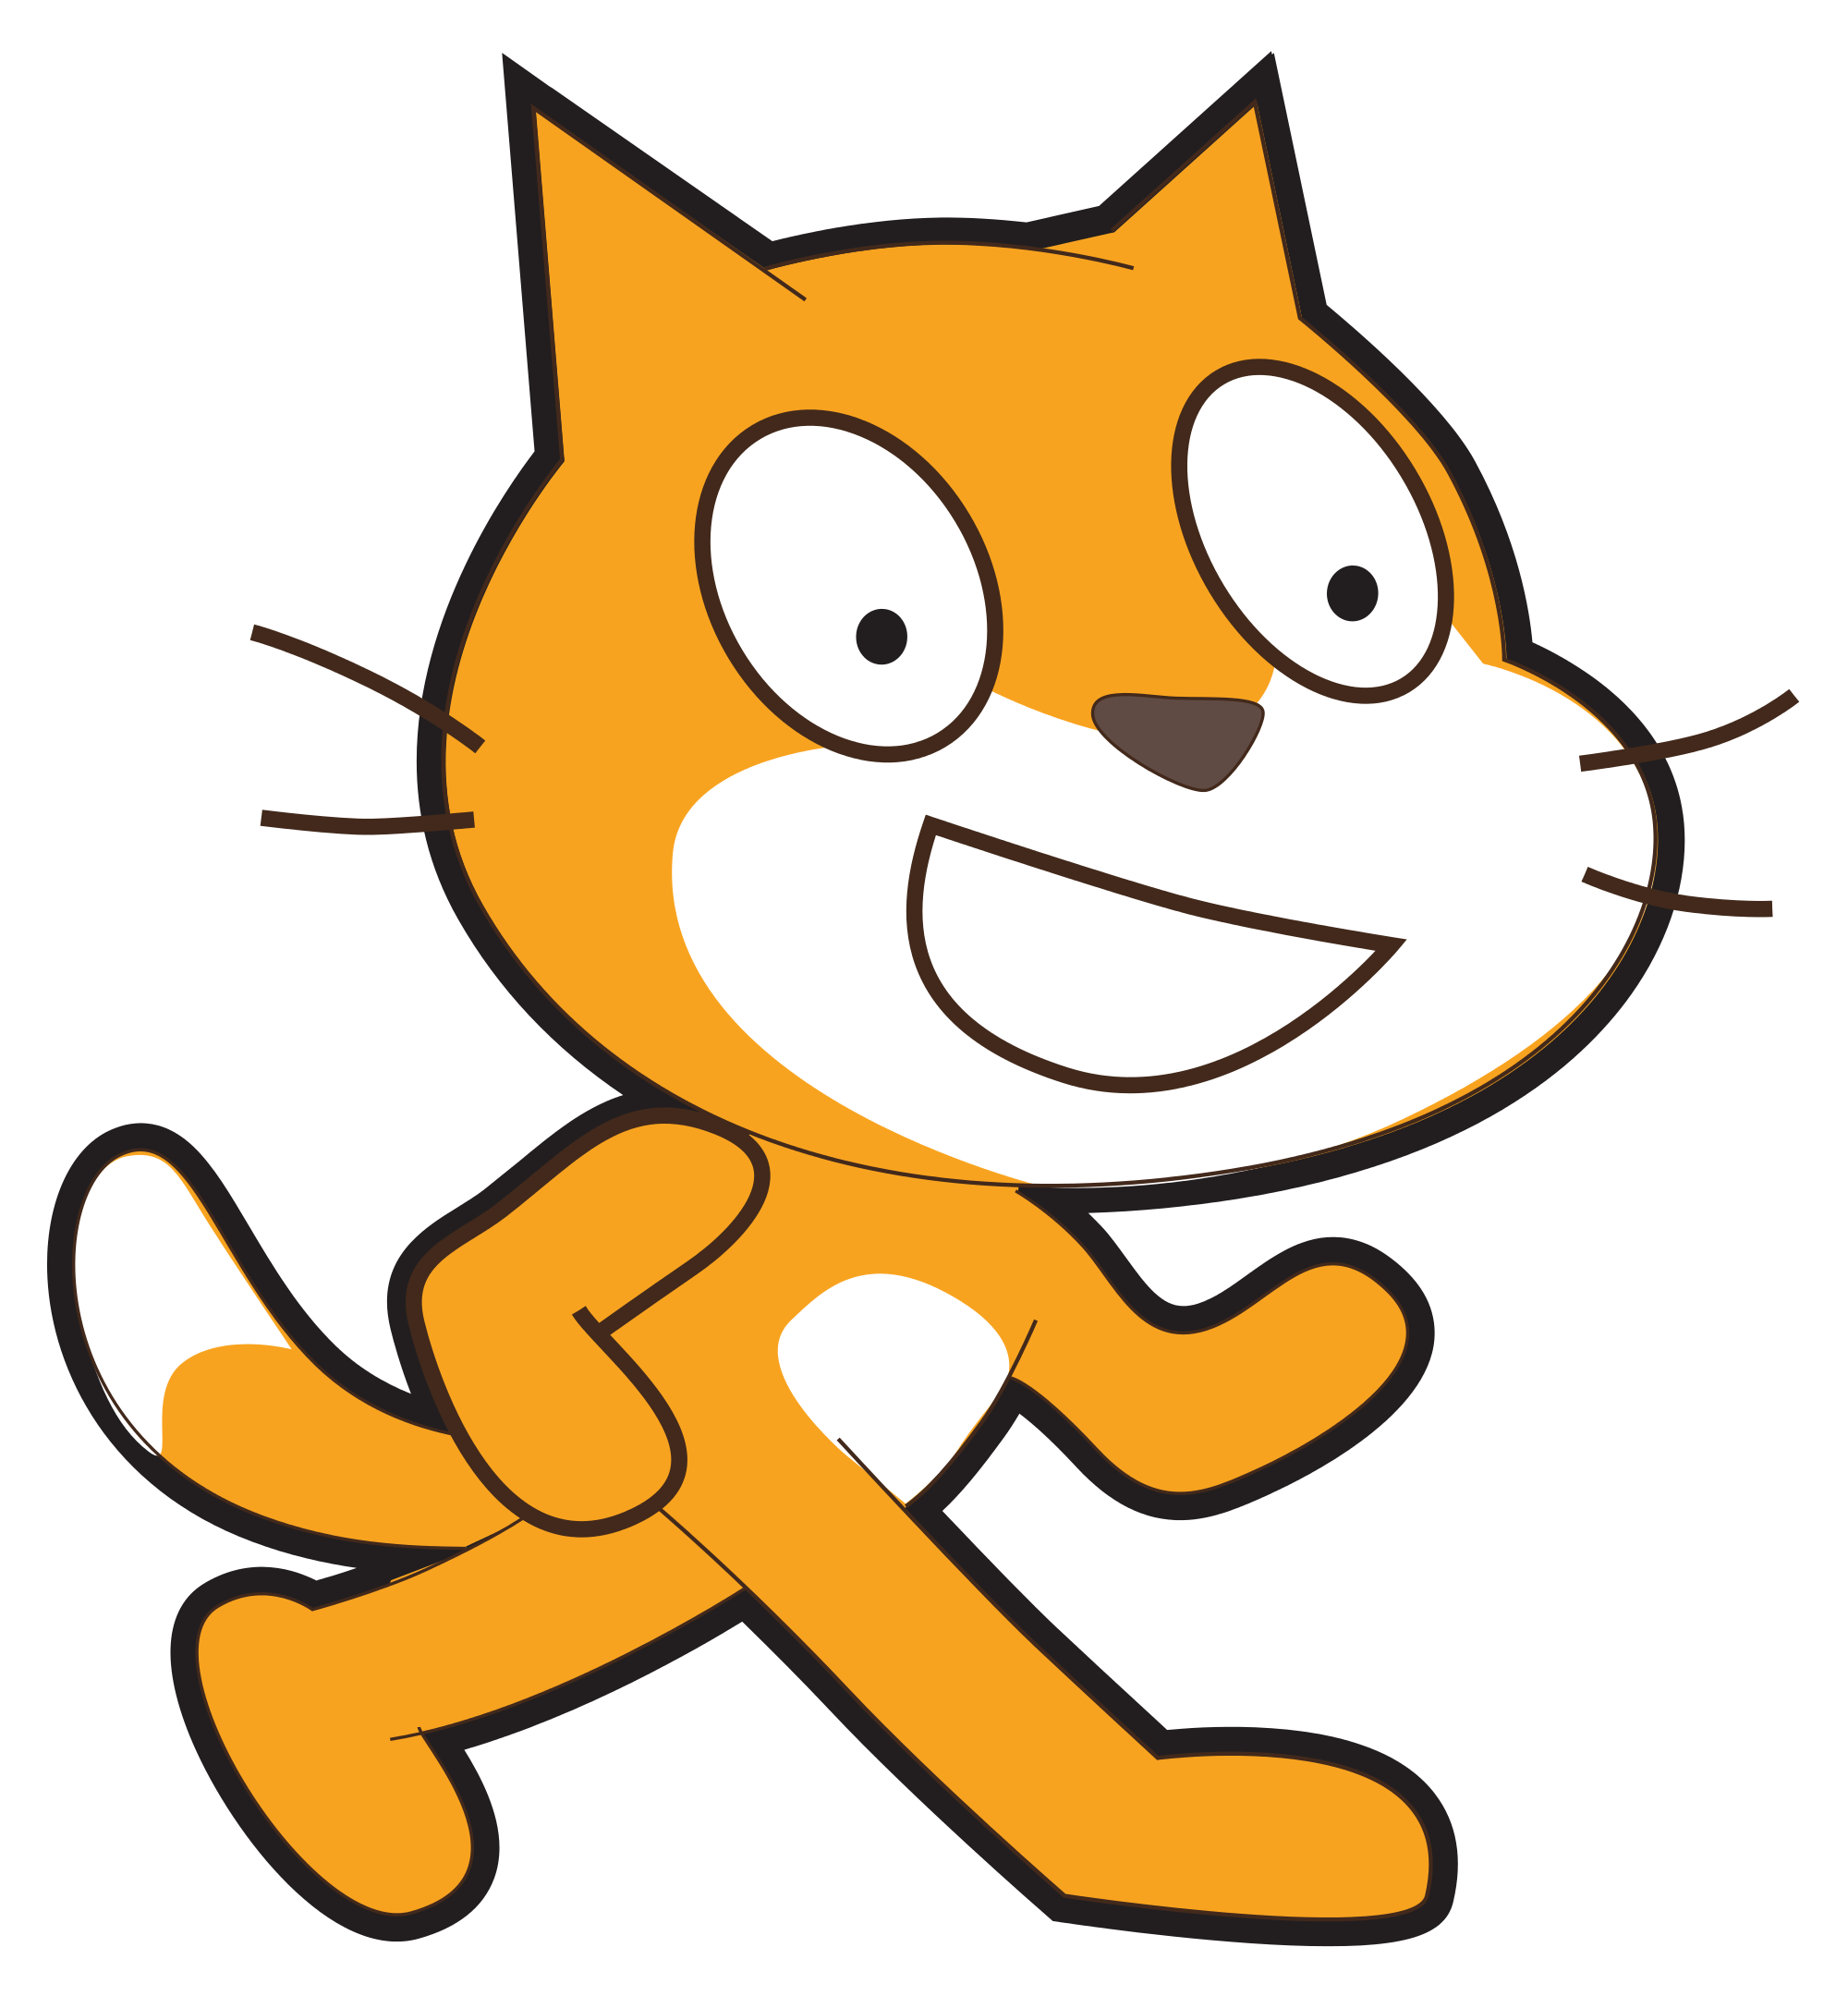 Link to Scratch resources.